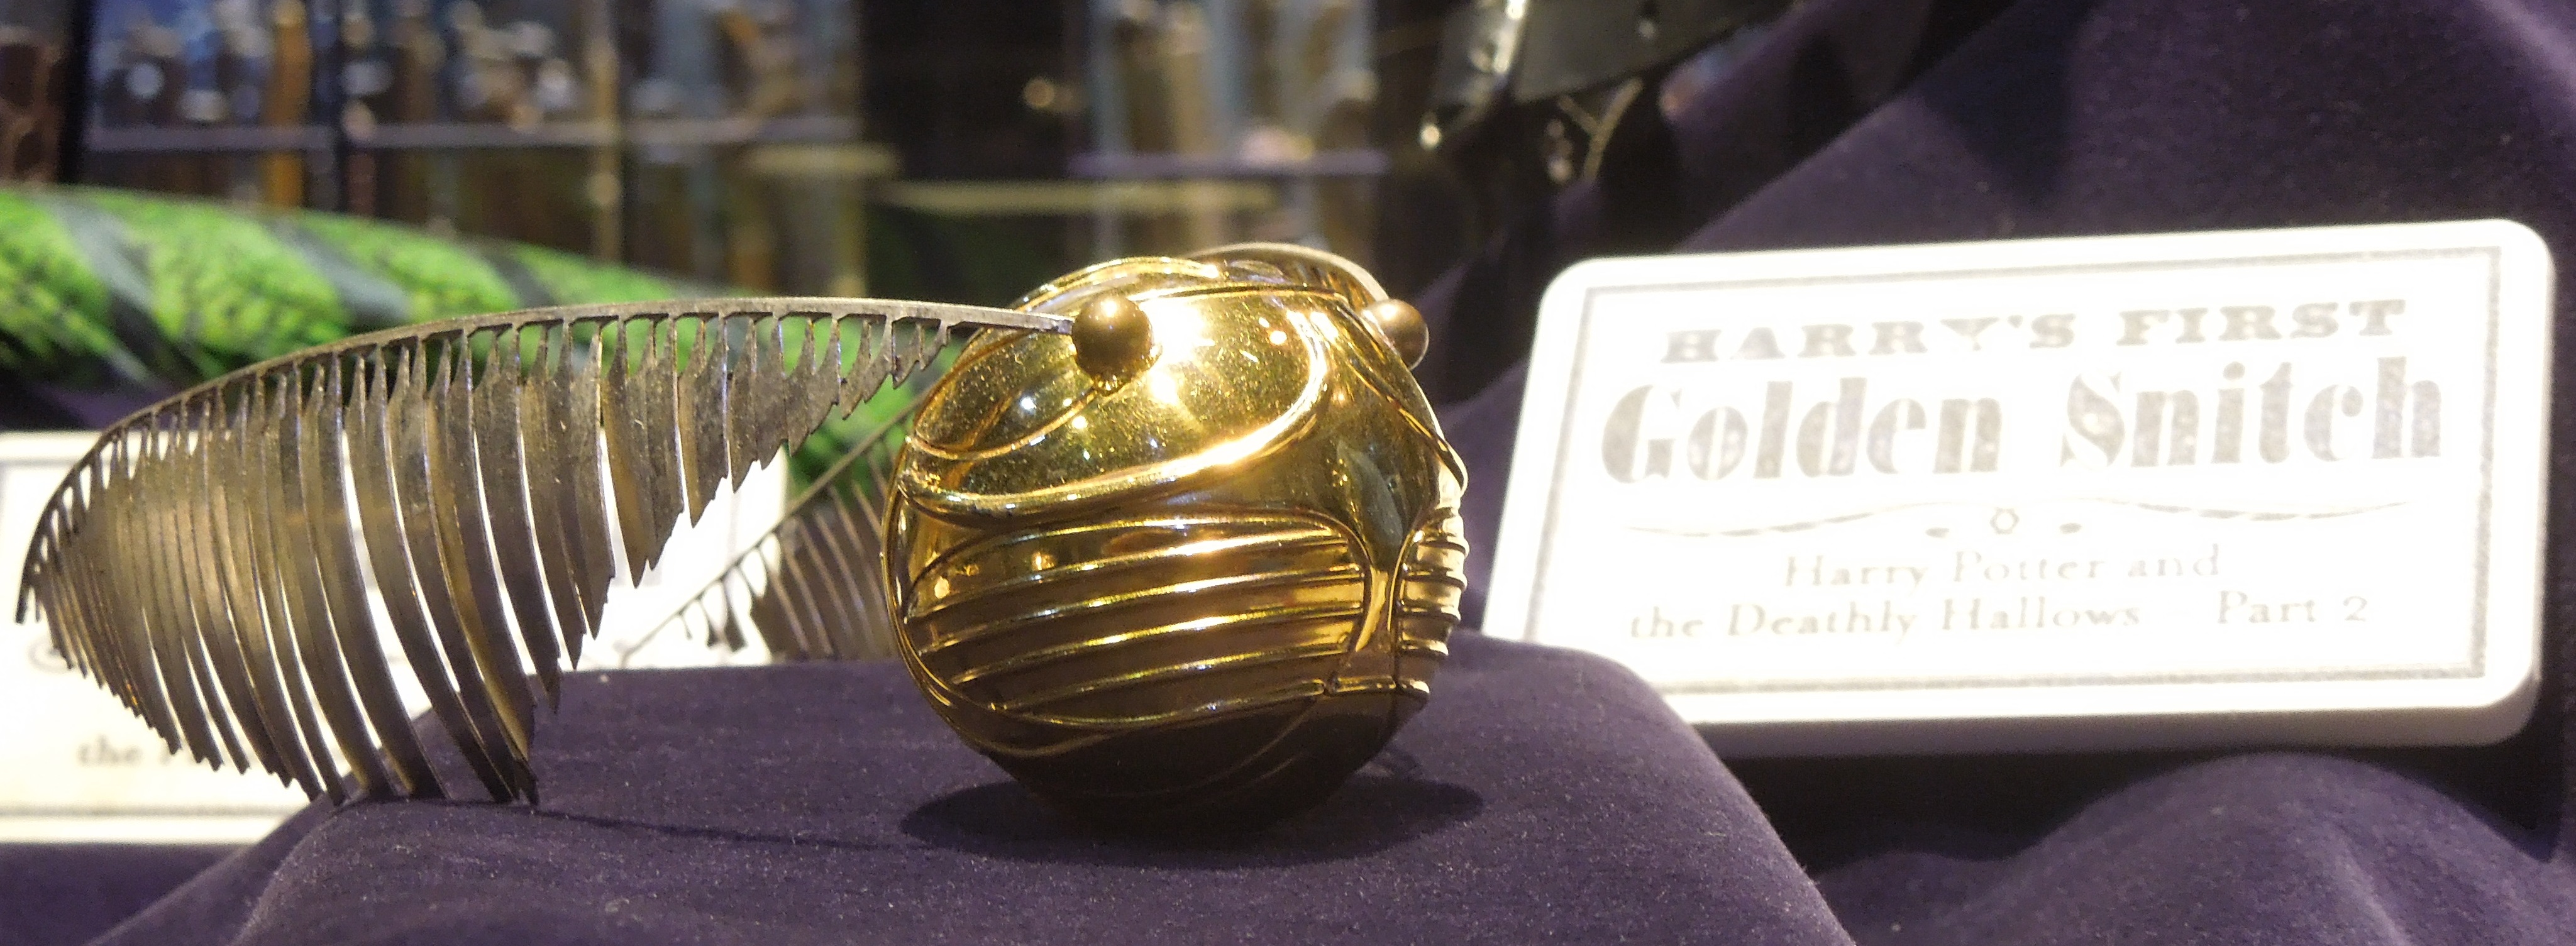 Things You Didn't Know About The Golden Snitch